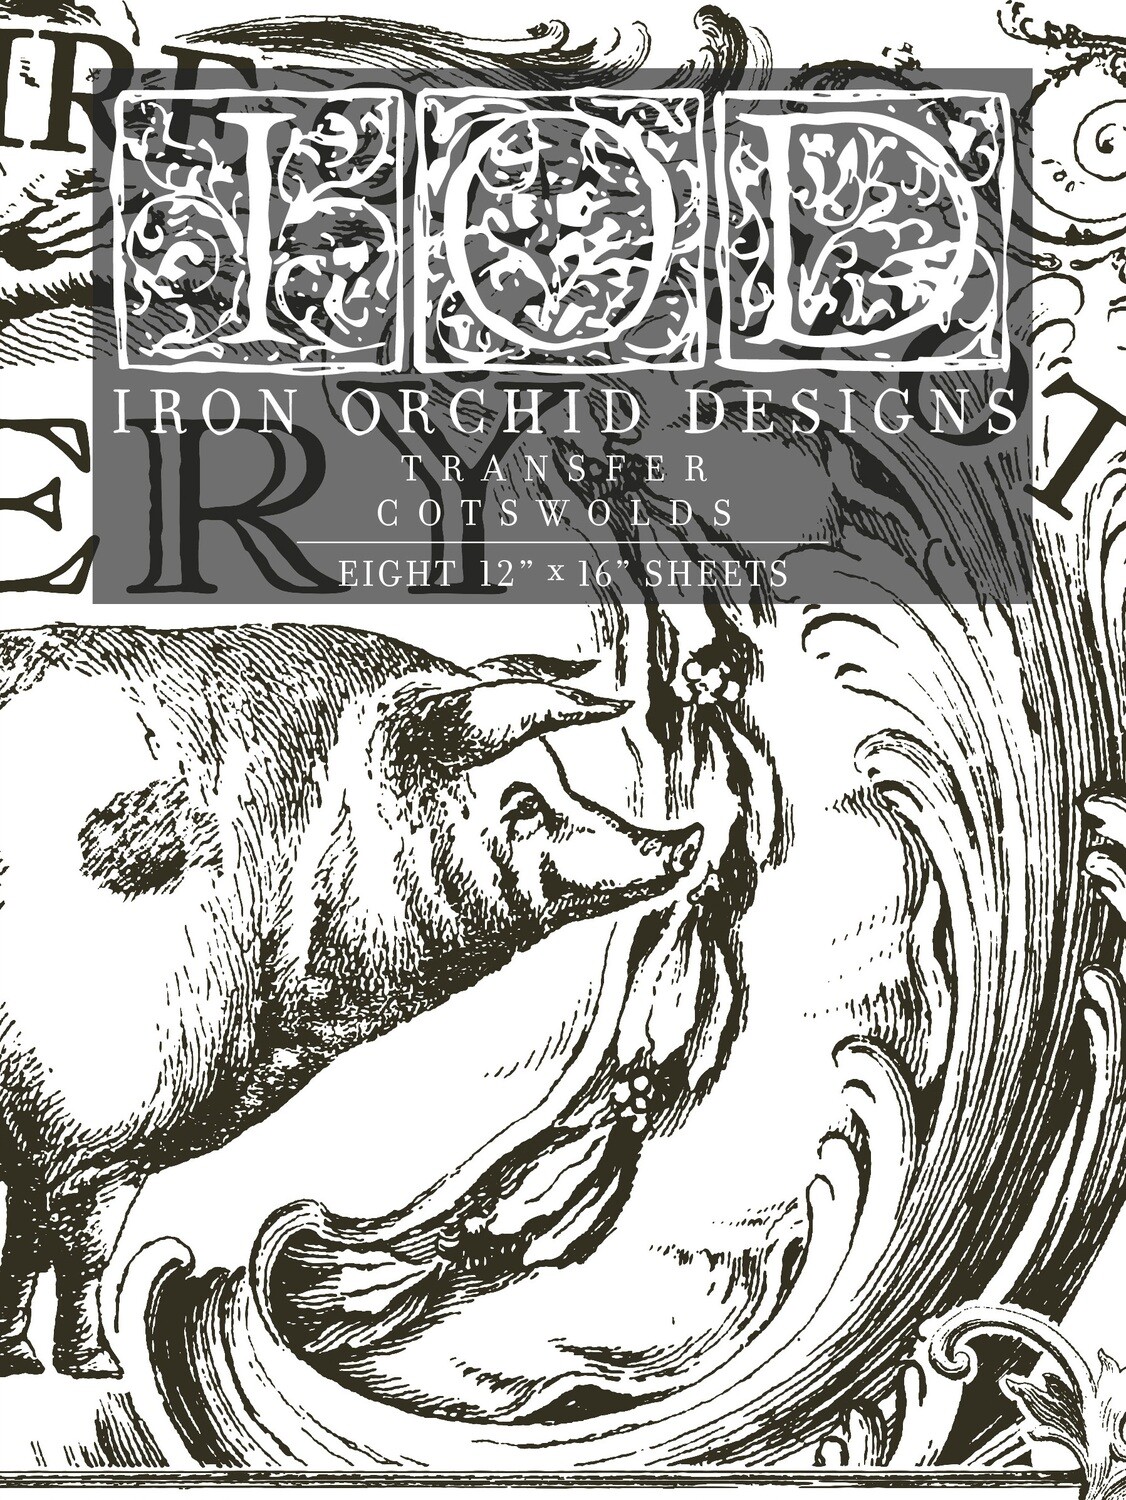 IOD COTSWOLDS DECOR TRANSFER - Iron Orchid Designs